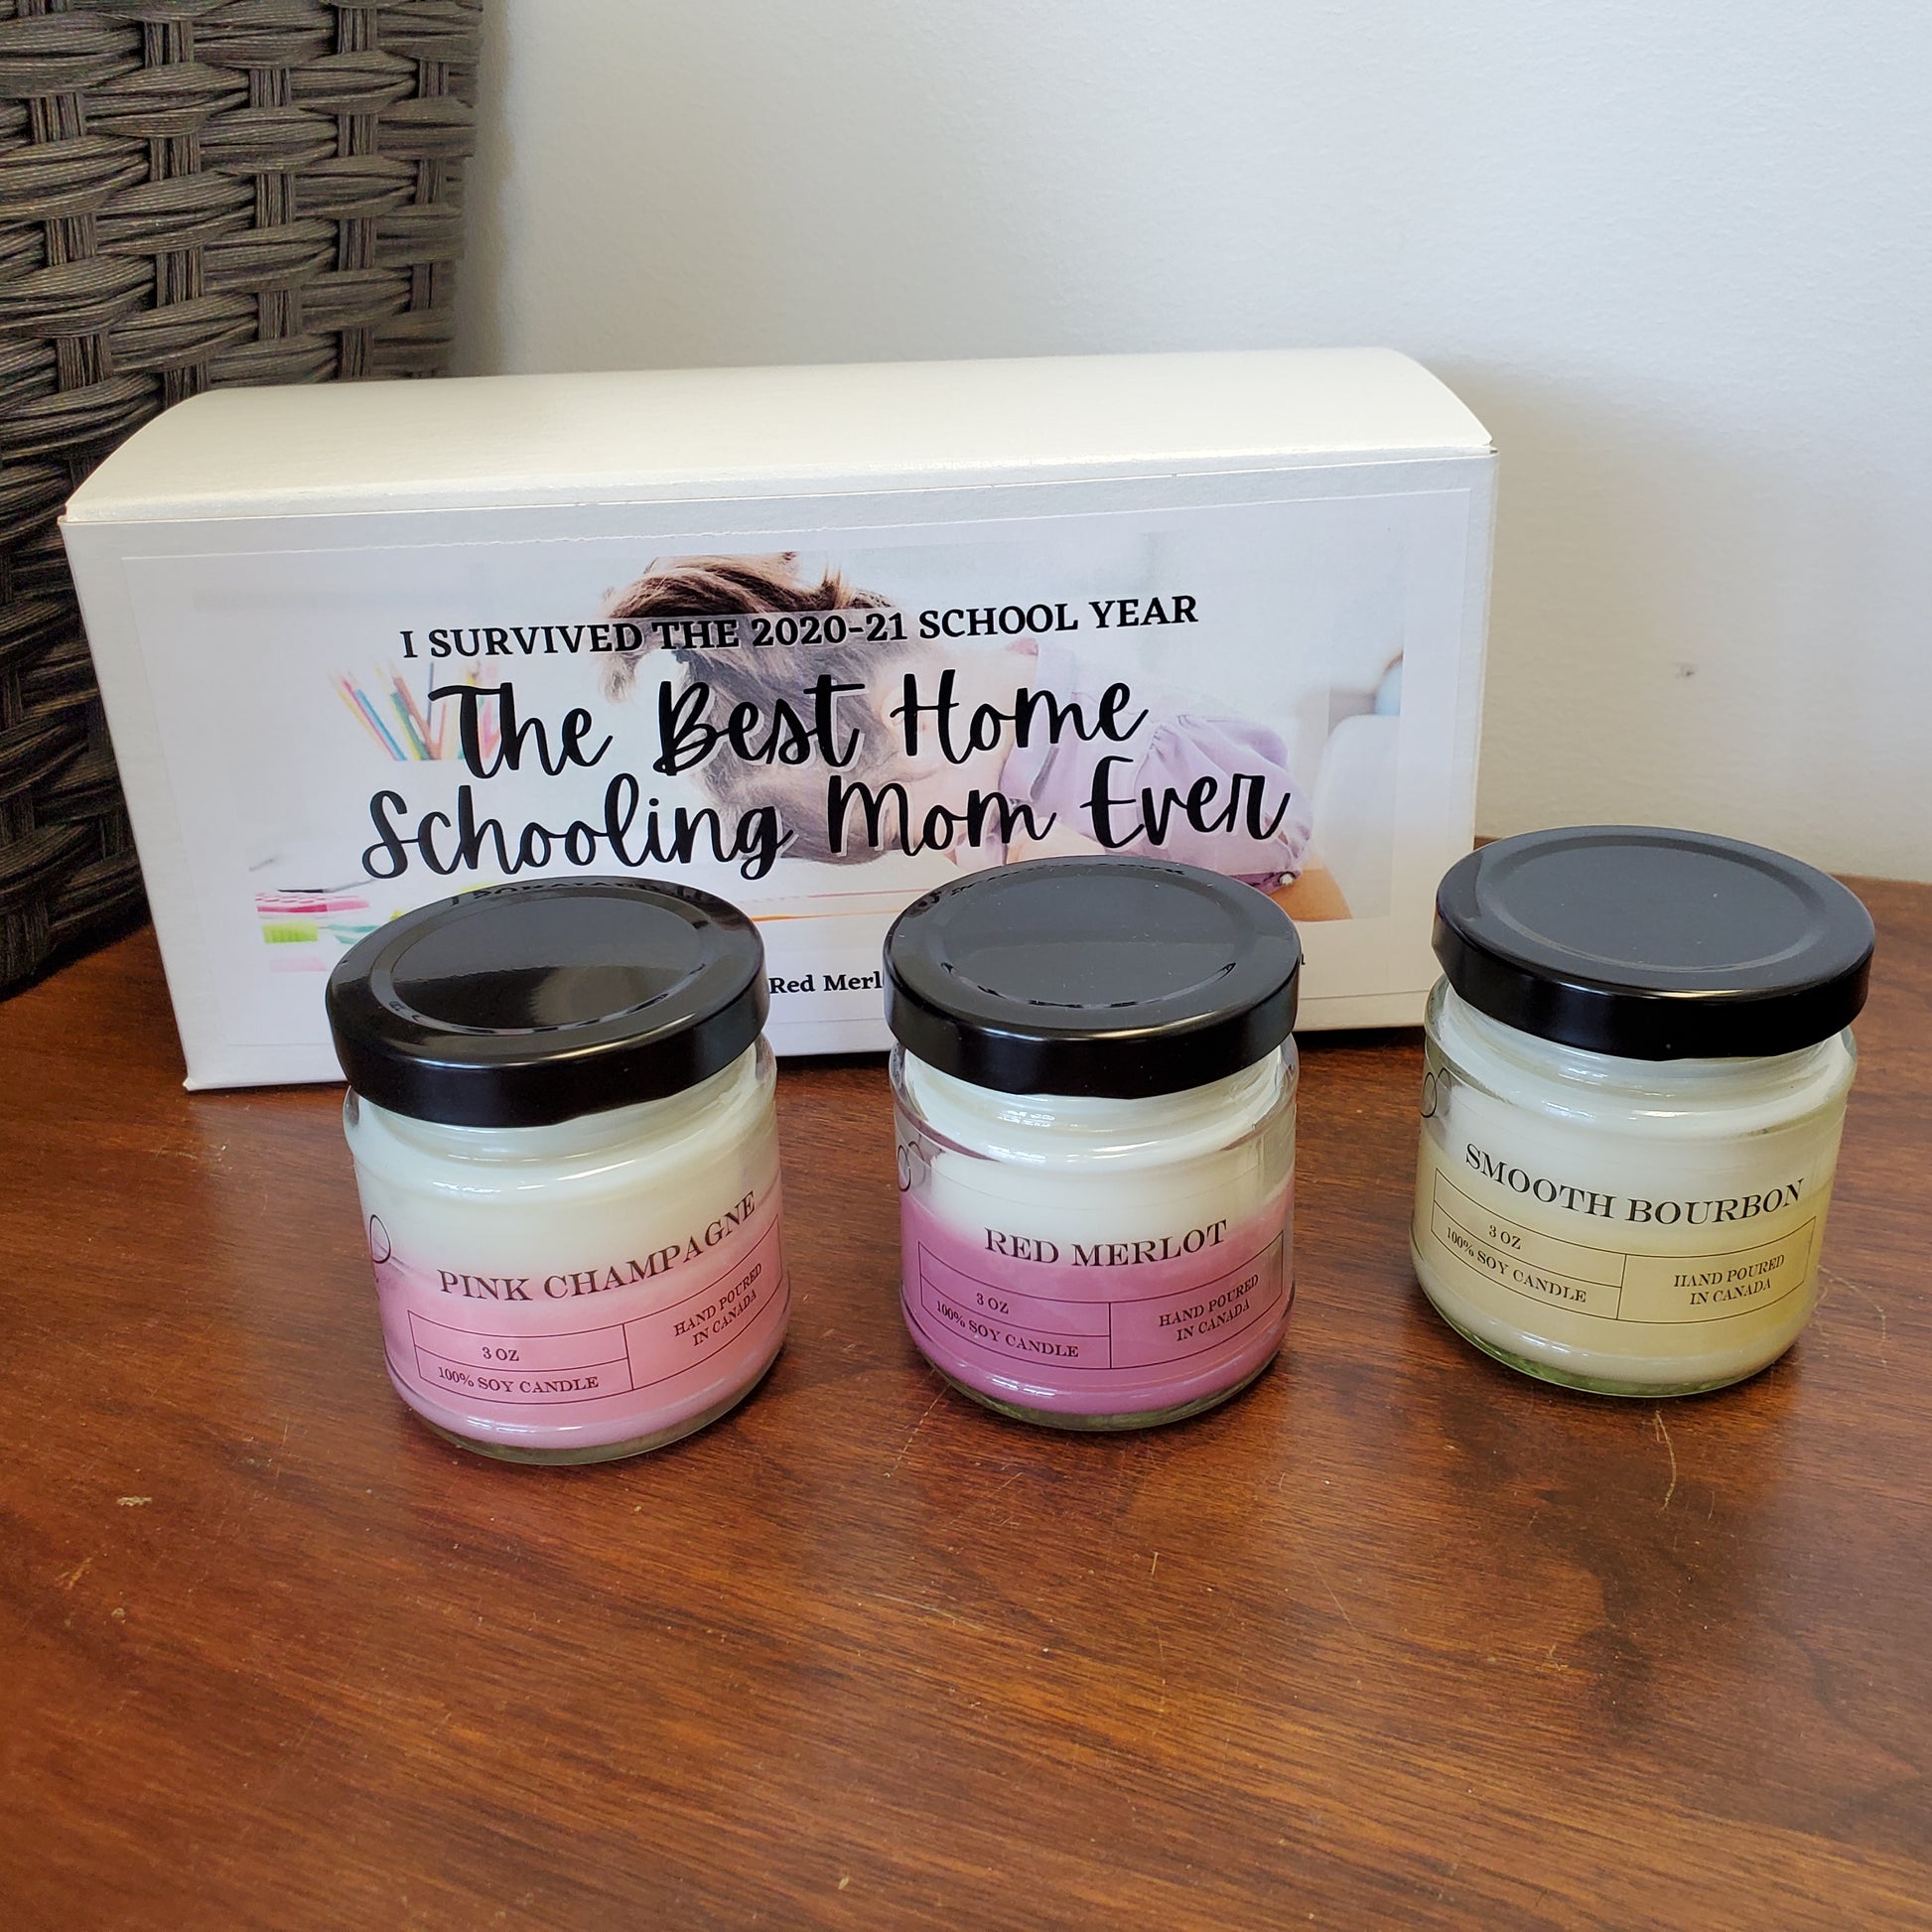 This Best Home Schooling Mom Ever Sample Sets includes Pink Champaign, Red Merlot and Smooth Bourbon.